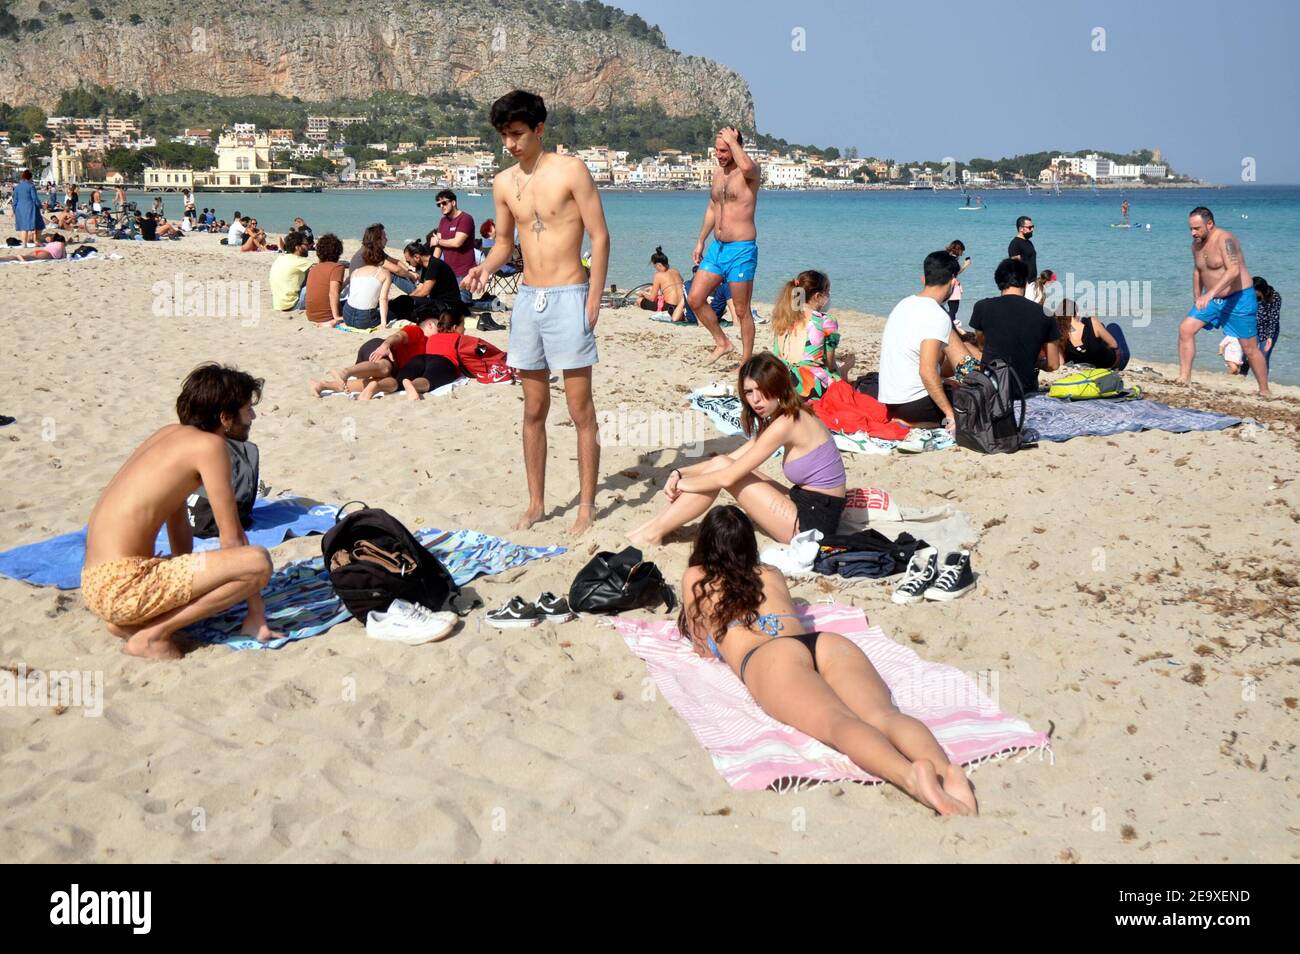 Can you swim in palermo?